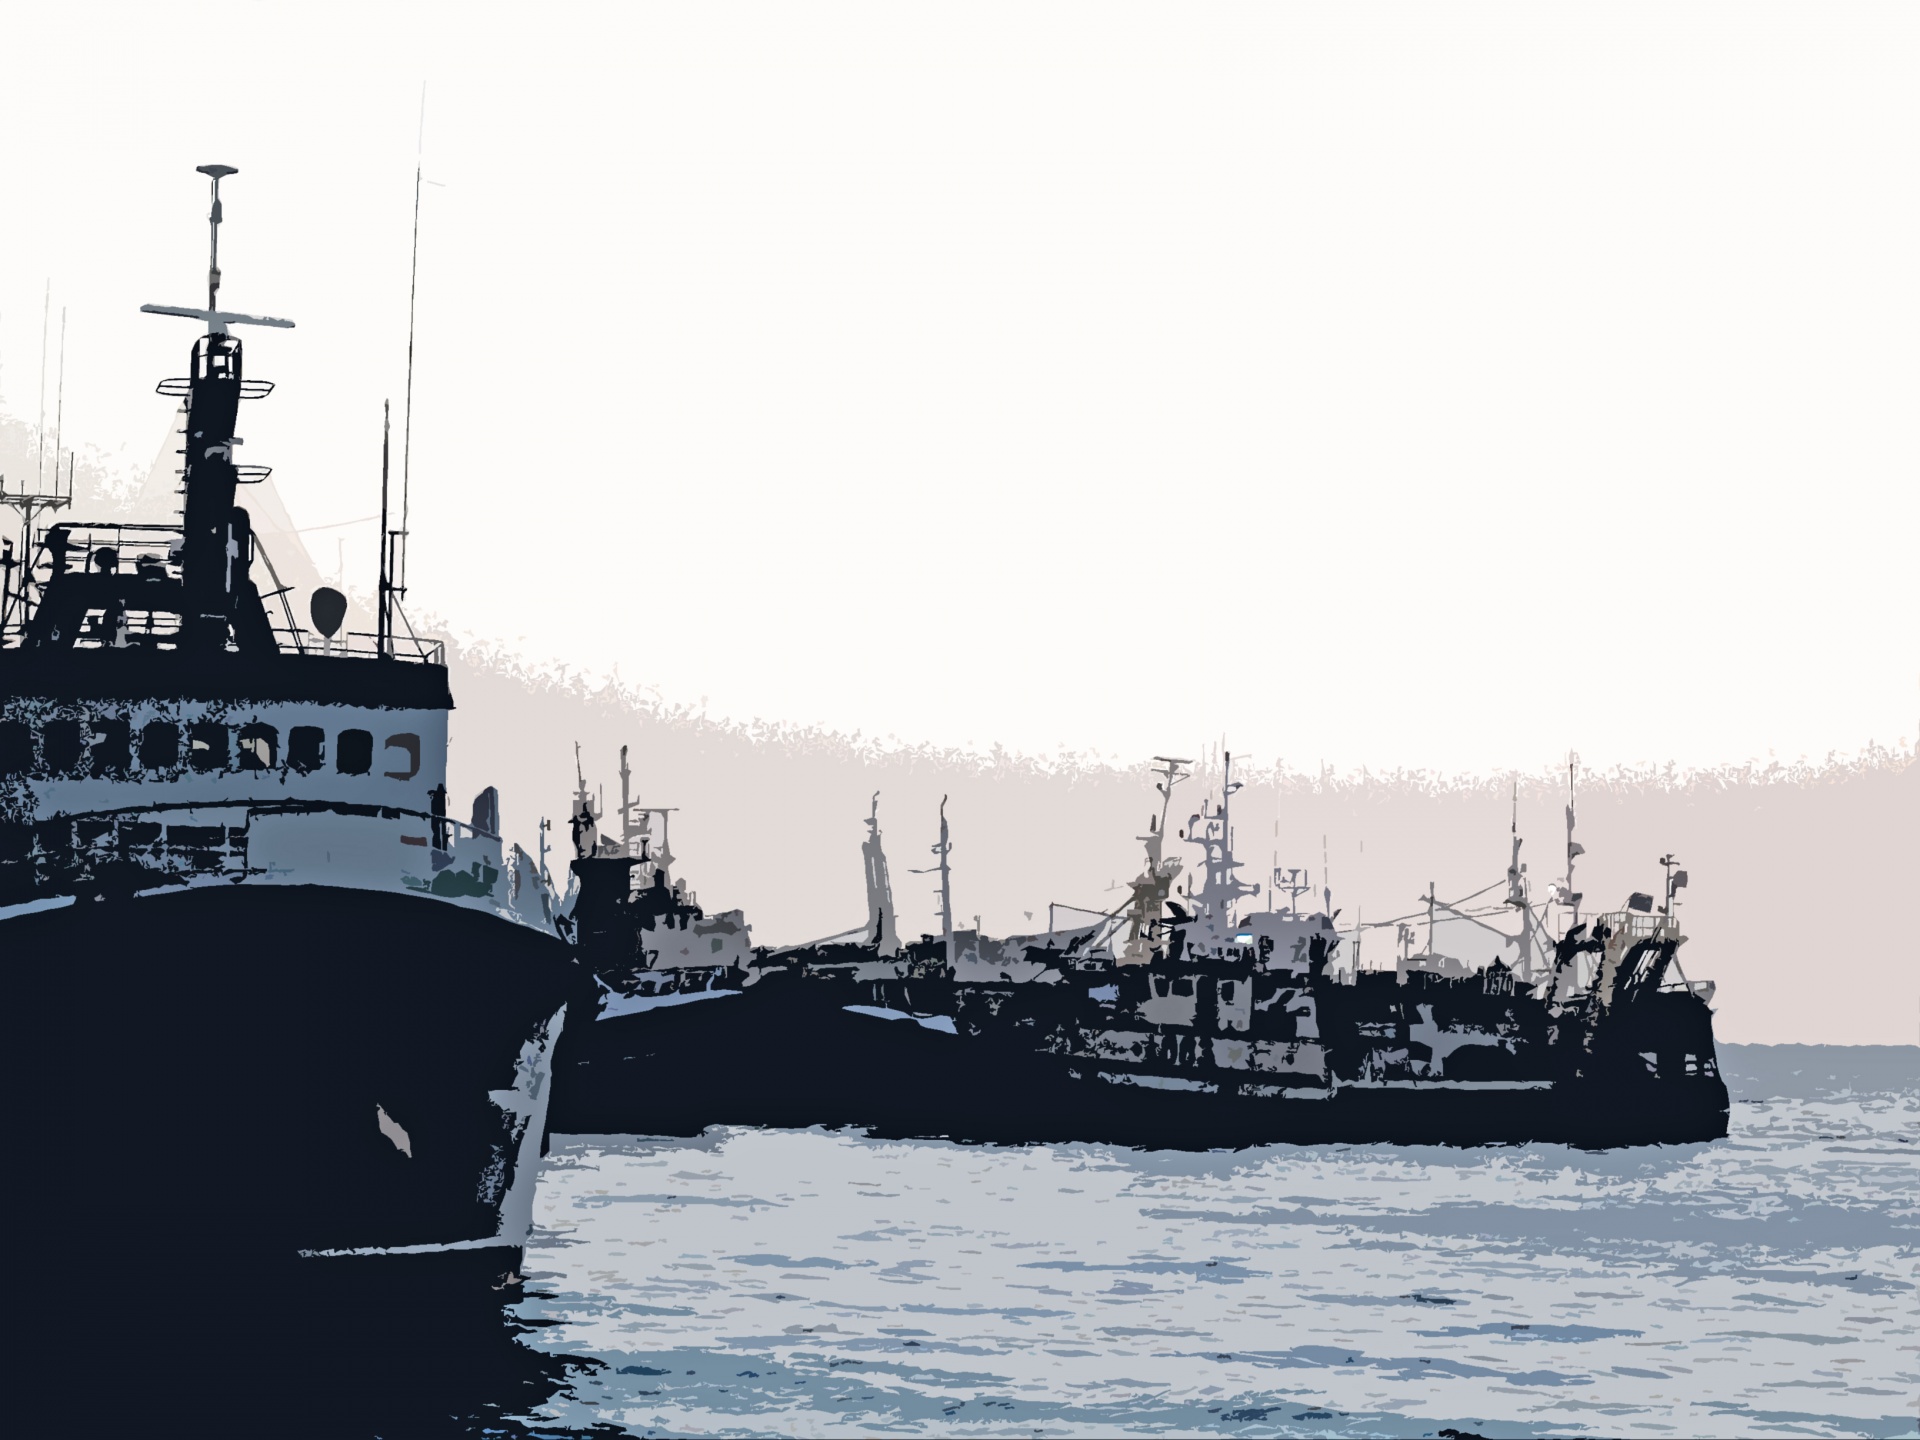 Abstract Image Of Fish Trawlers